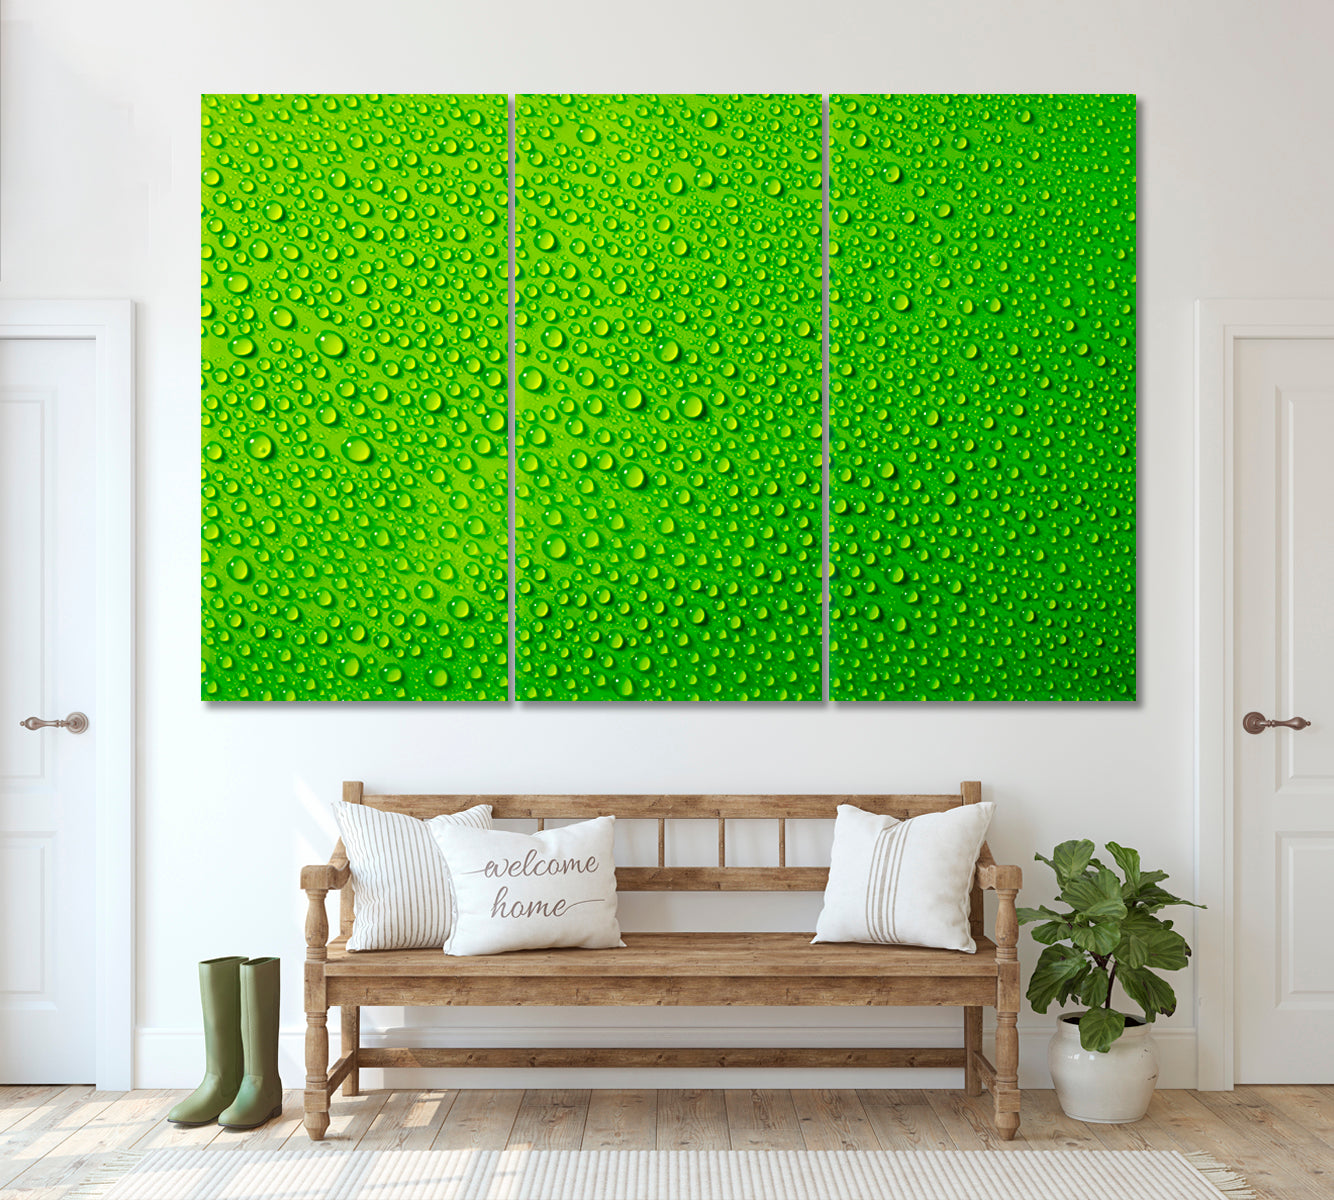 Water Drops on Green Backdrop Canvas Print ArtLexy 3 Panels 36"x24" inches 